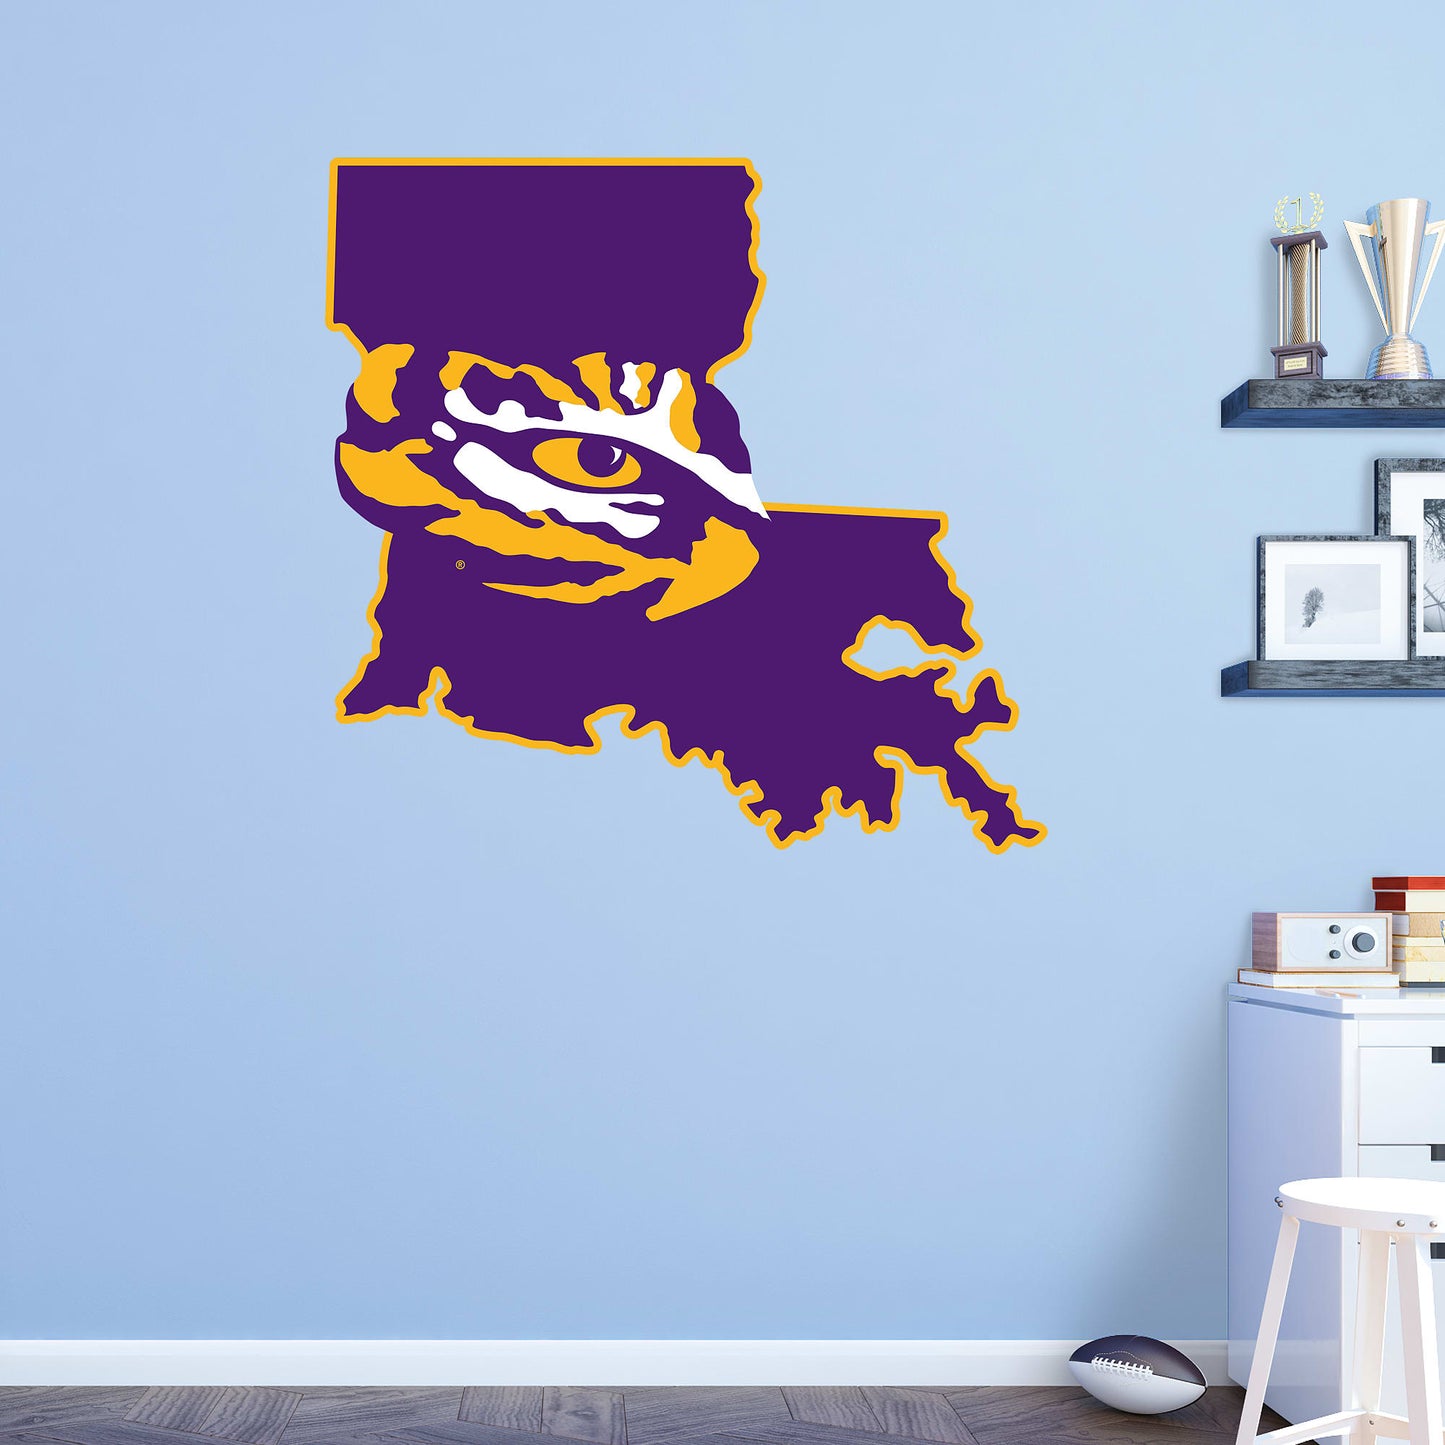 LSU Tigers: State of Louisiana - Officially Licensed Removable Wall Decal